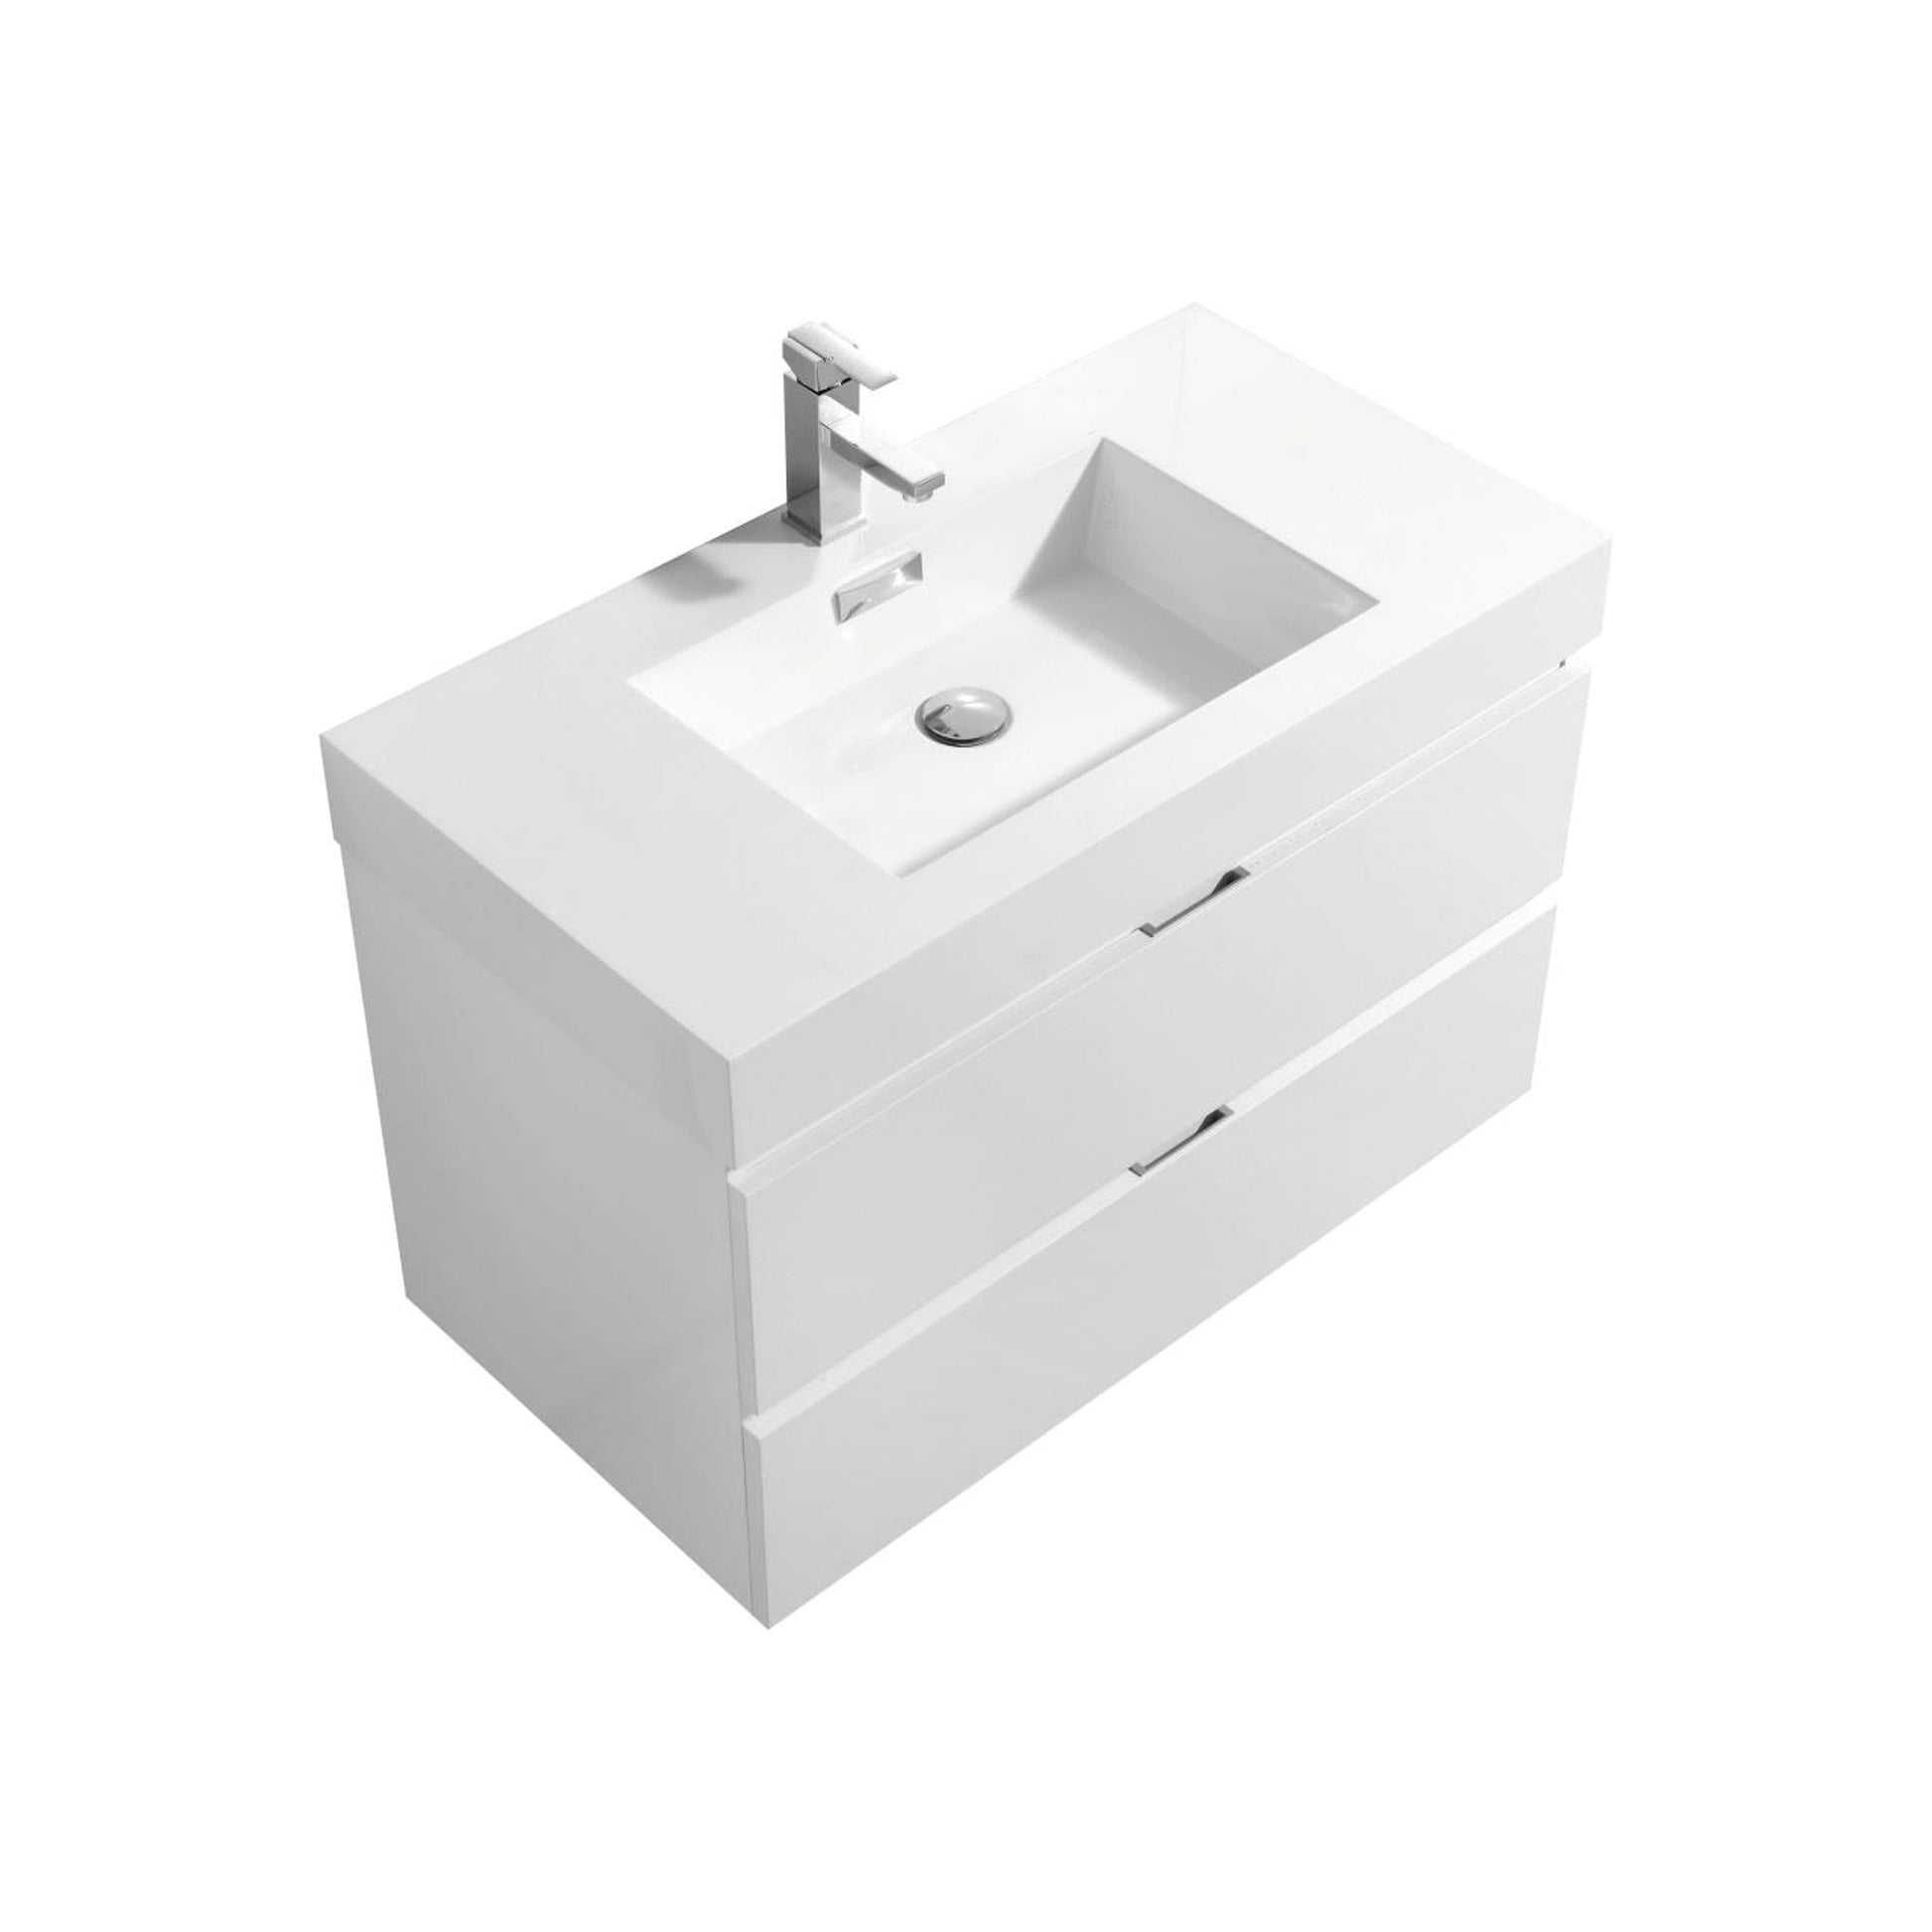 KubeBath Bliss 36" High Gloss White Wall-Mounted Modern Bathroom Vanity With Single Integrated Acrylic Sink With Overflow and 36" White Framed Mirror With Shelf